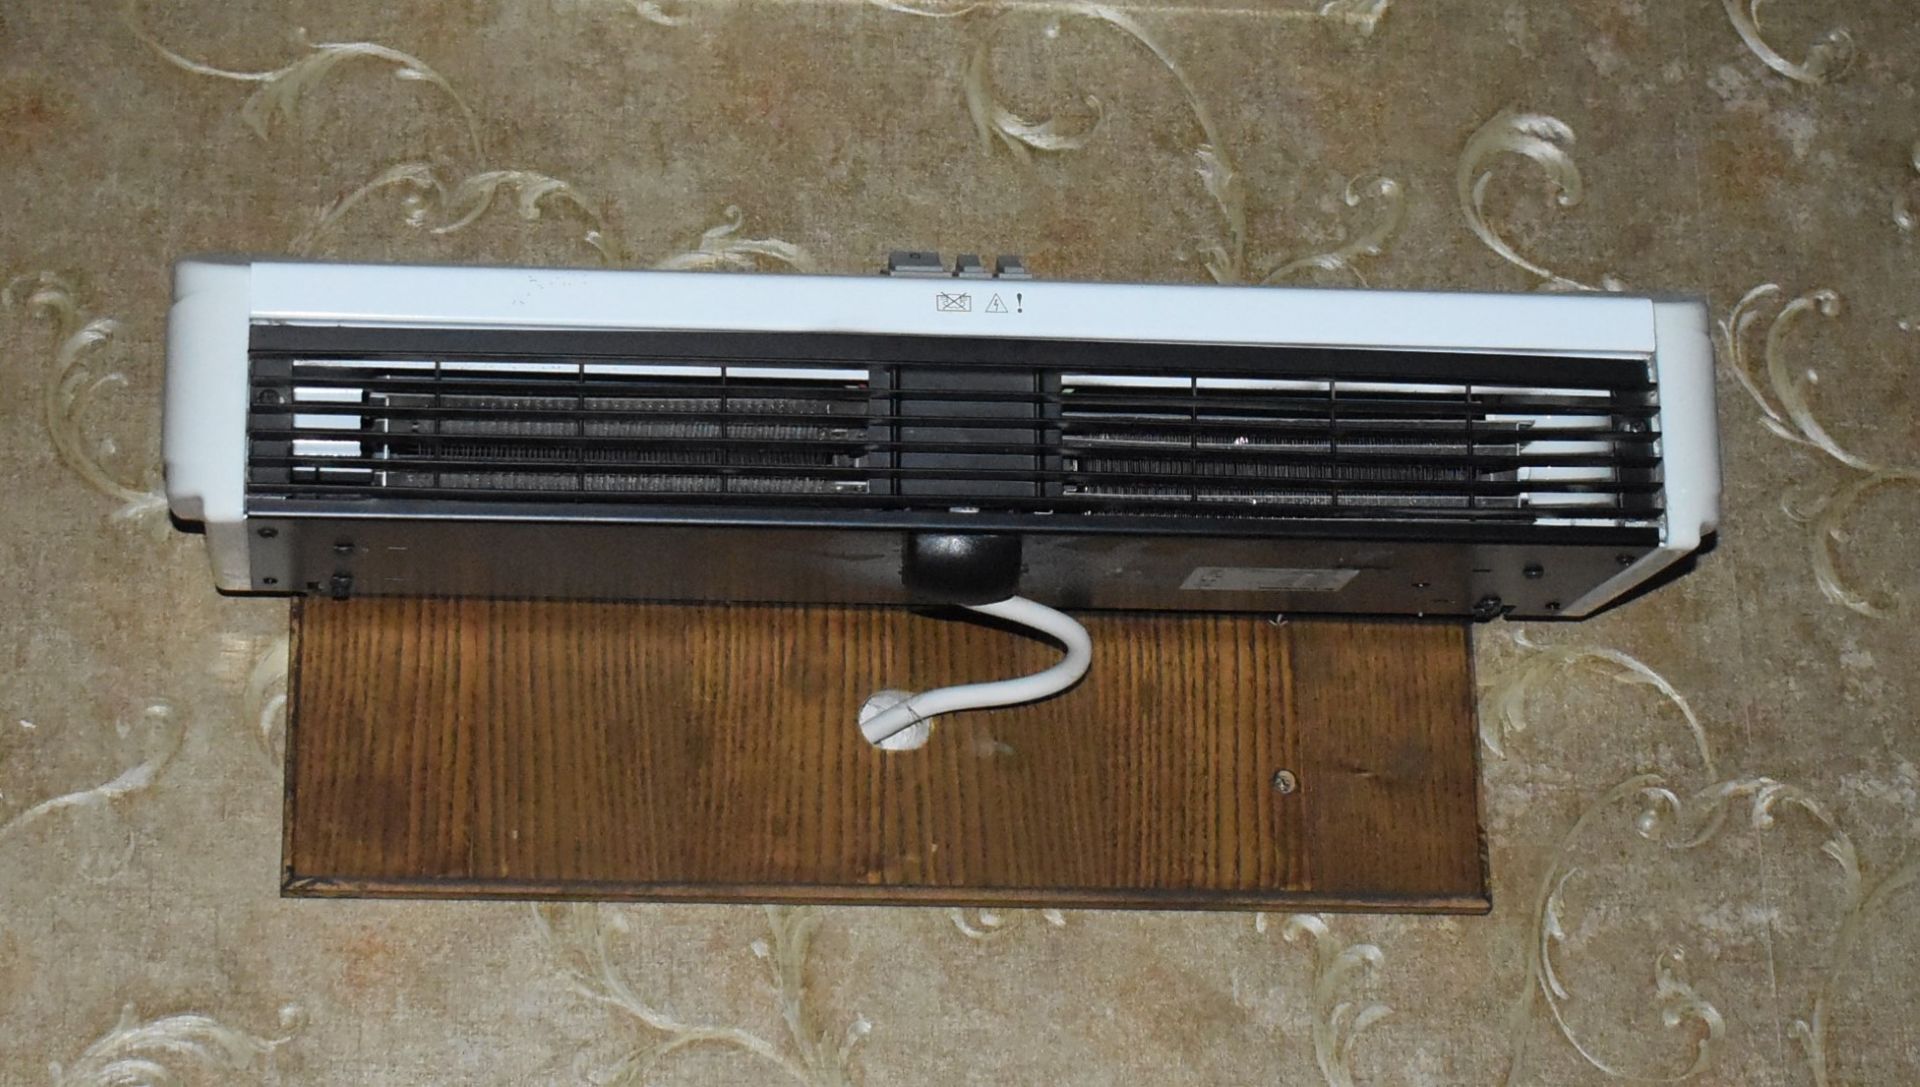 3 x Various Heaters Including Dimplex Air Curtain Door Heater and Two Fan Heaters - CL586